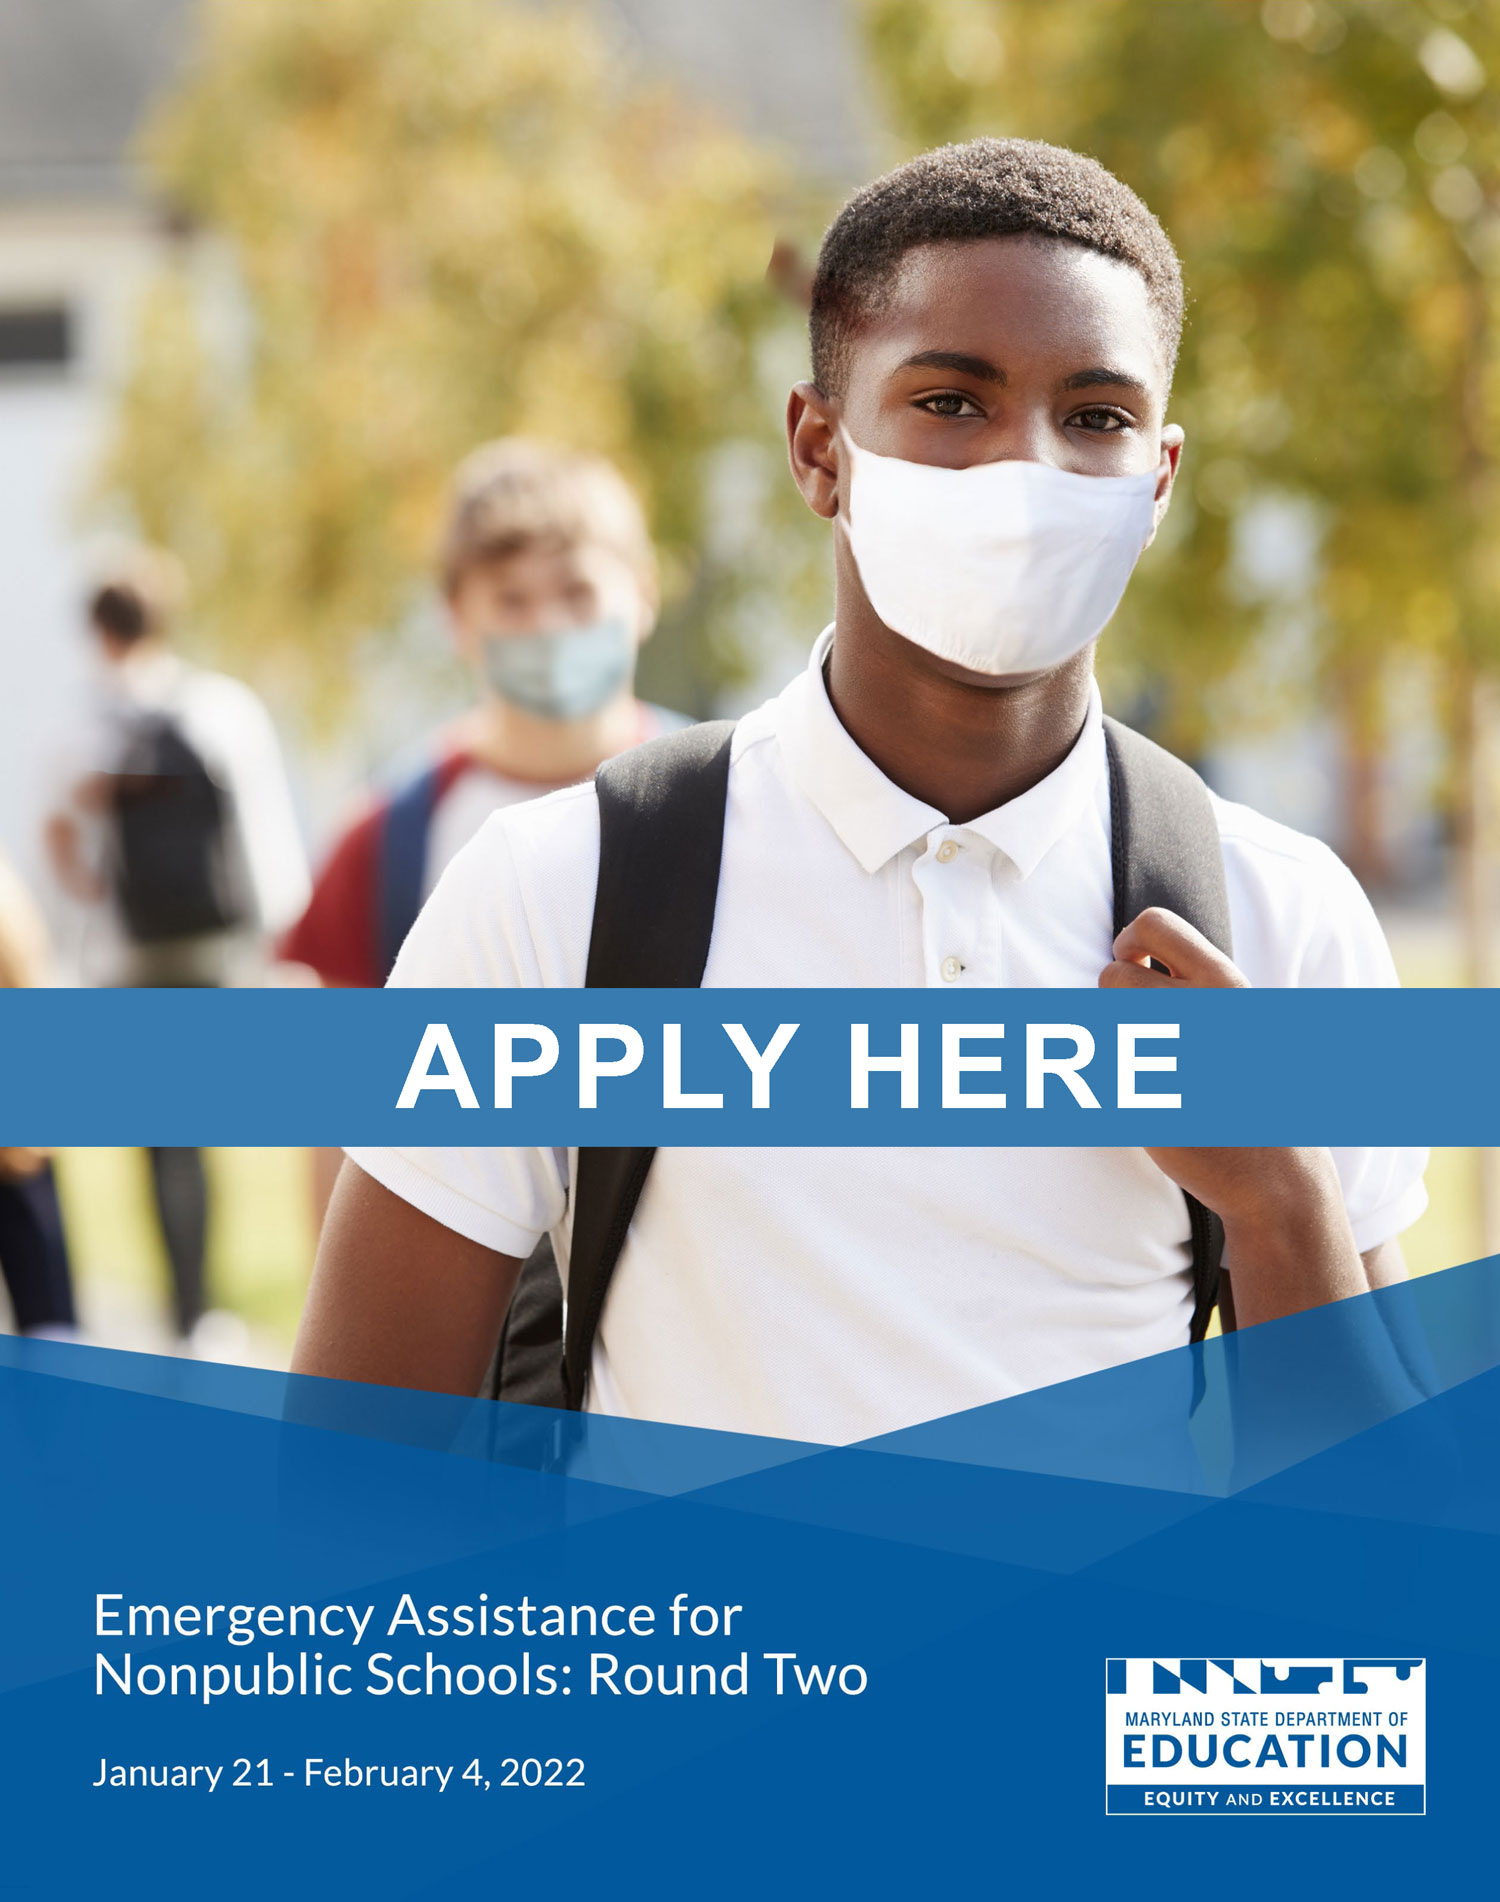 Emergency Assistance for Nonpublic Schools: Round Two Apply Here